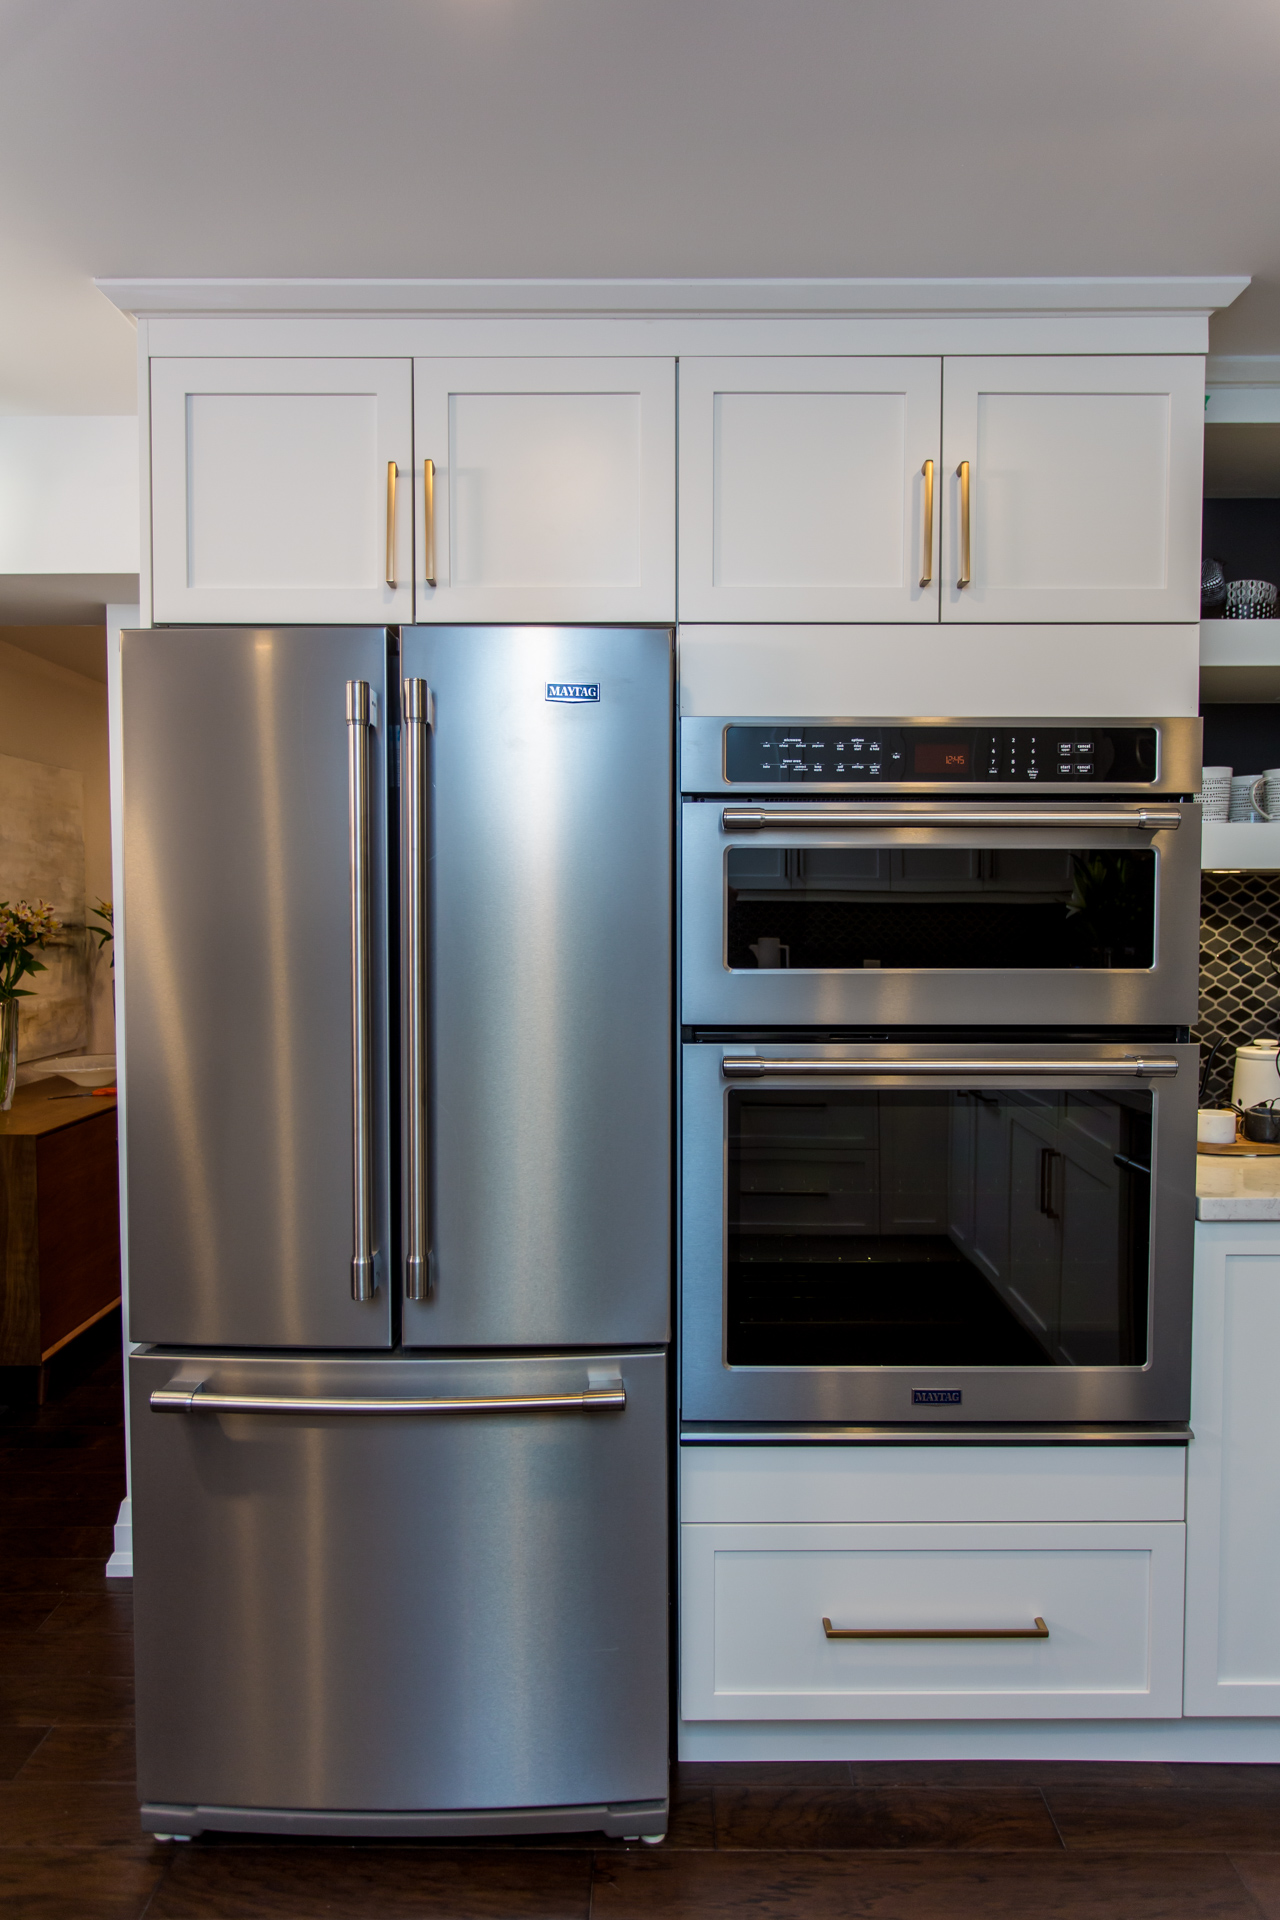 Chrome fridge and white cabinetry in the kitchen